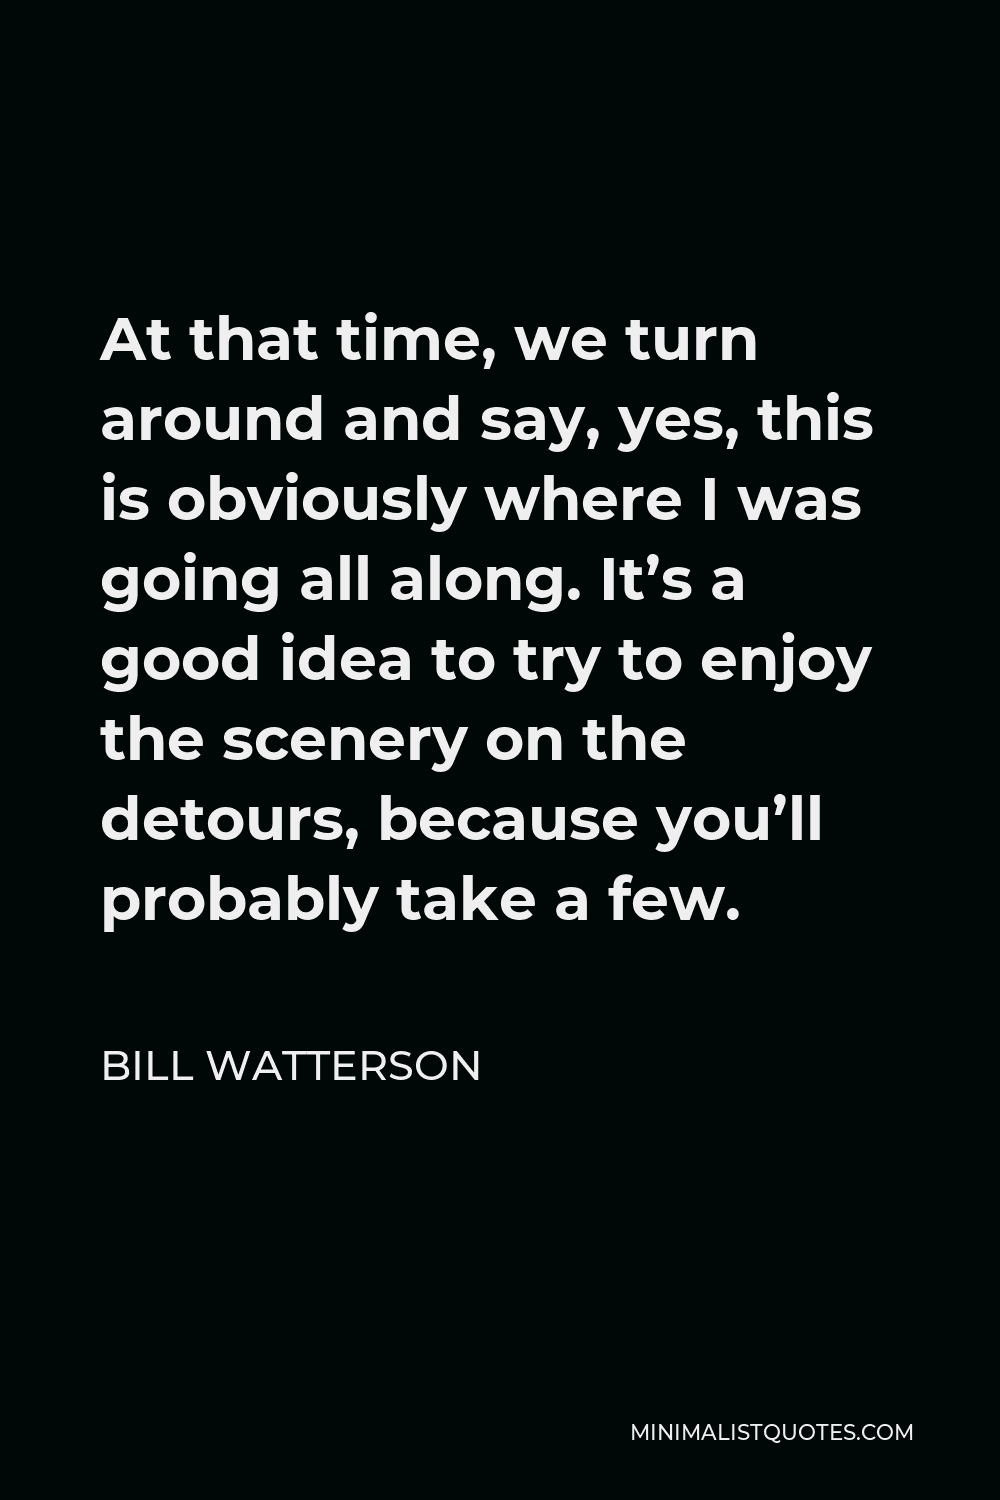 Bill Watterson Quote - At that time, we turn around and say, yes, this is obviously where I was going all along. It’s a good idea to try to enjoy the scenery on the detours, because you’ll probably take a few.